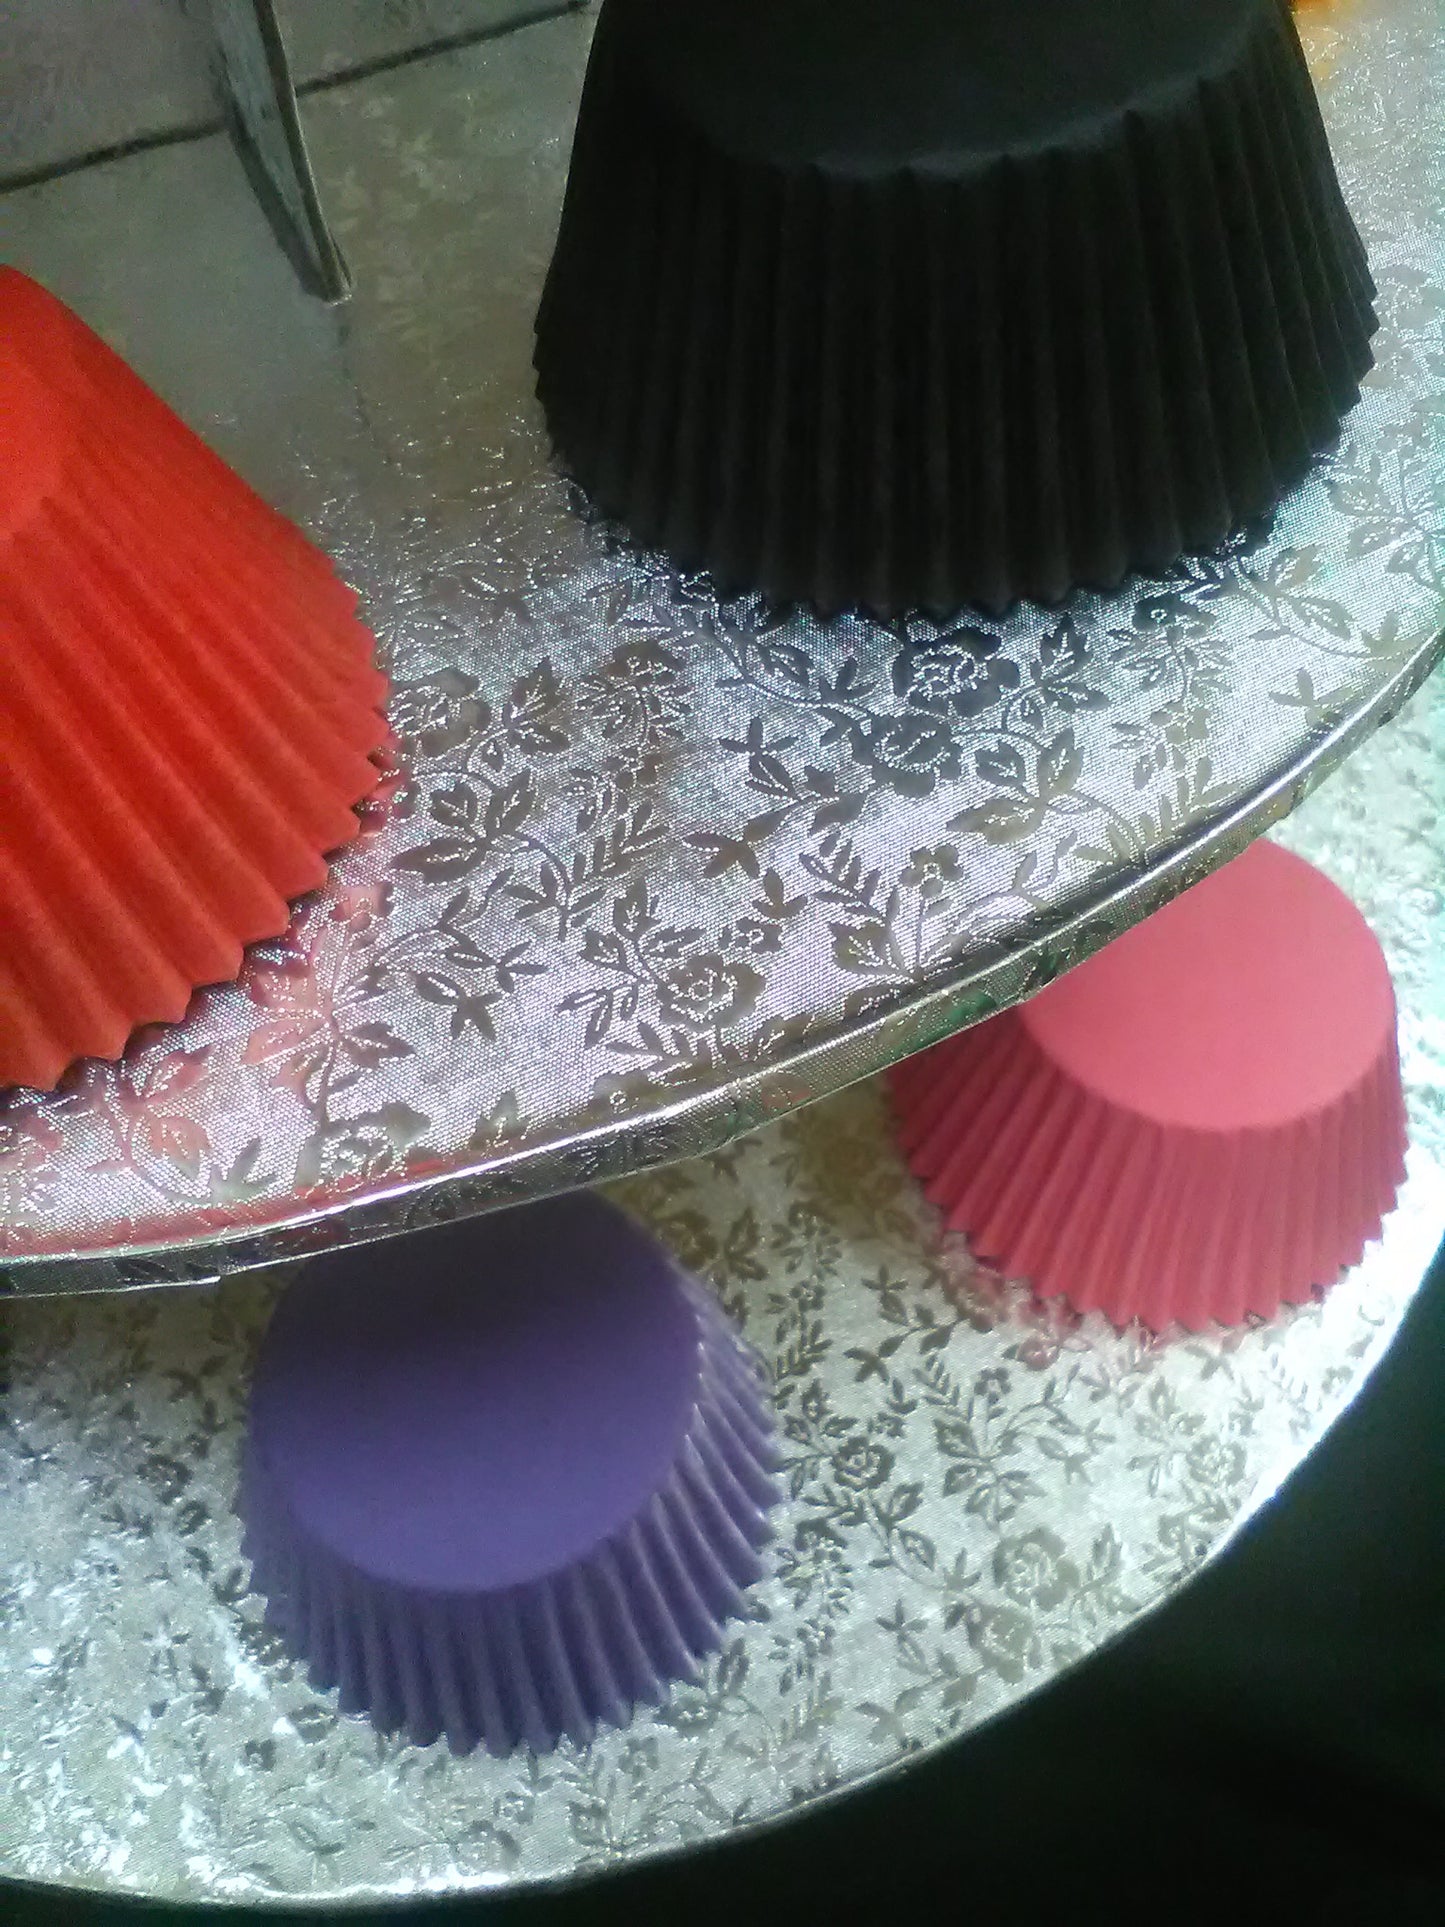 5 Tier Cake Stands